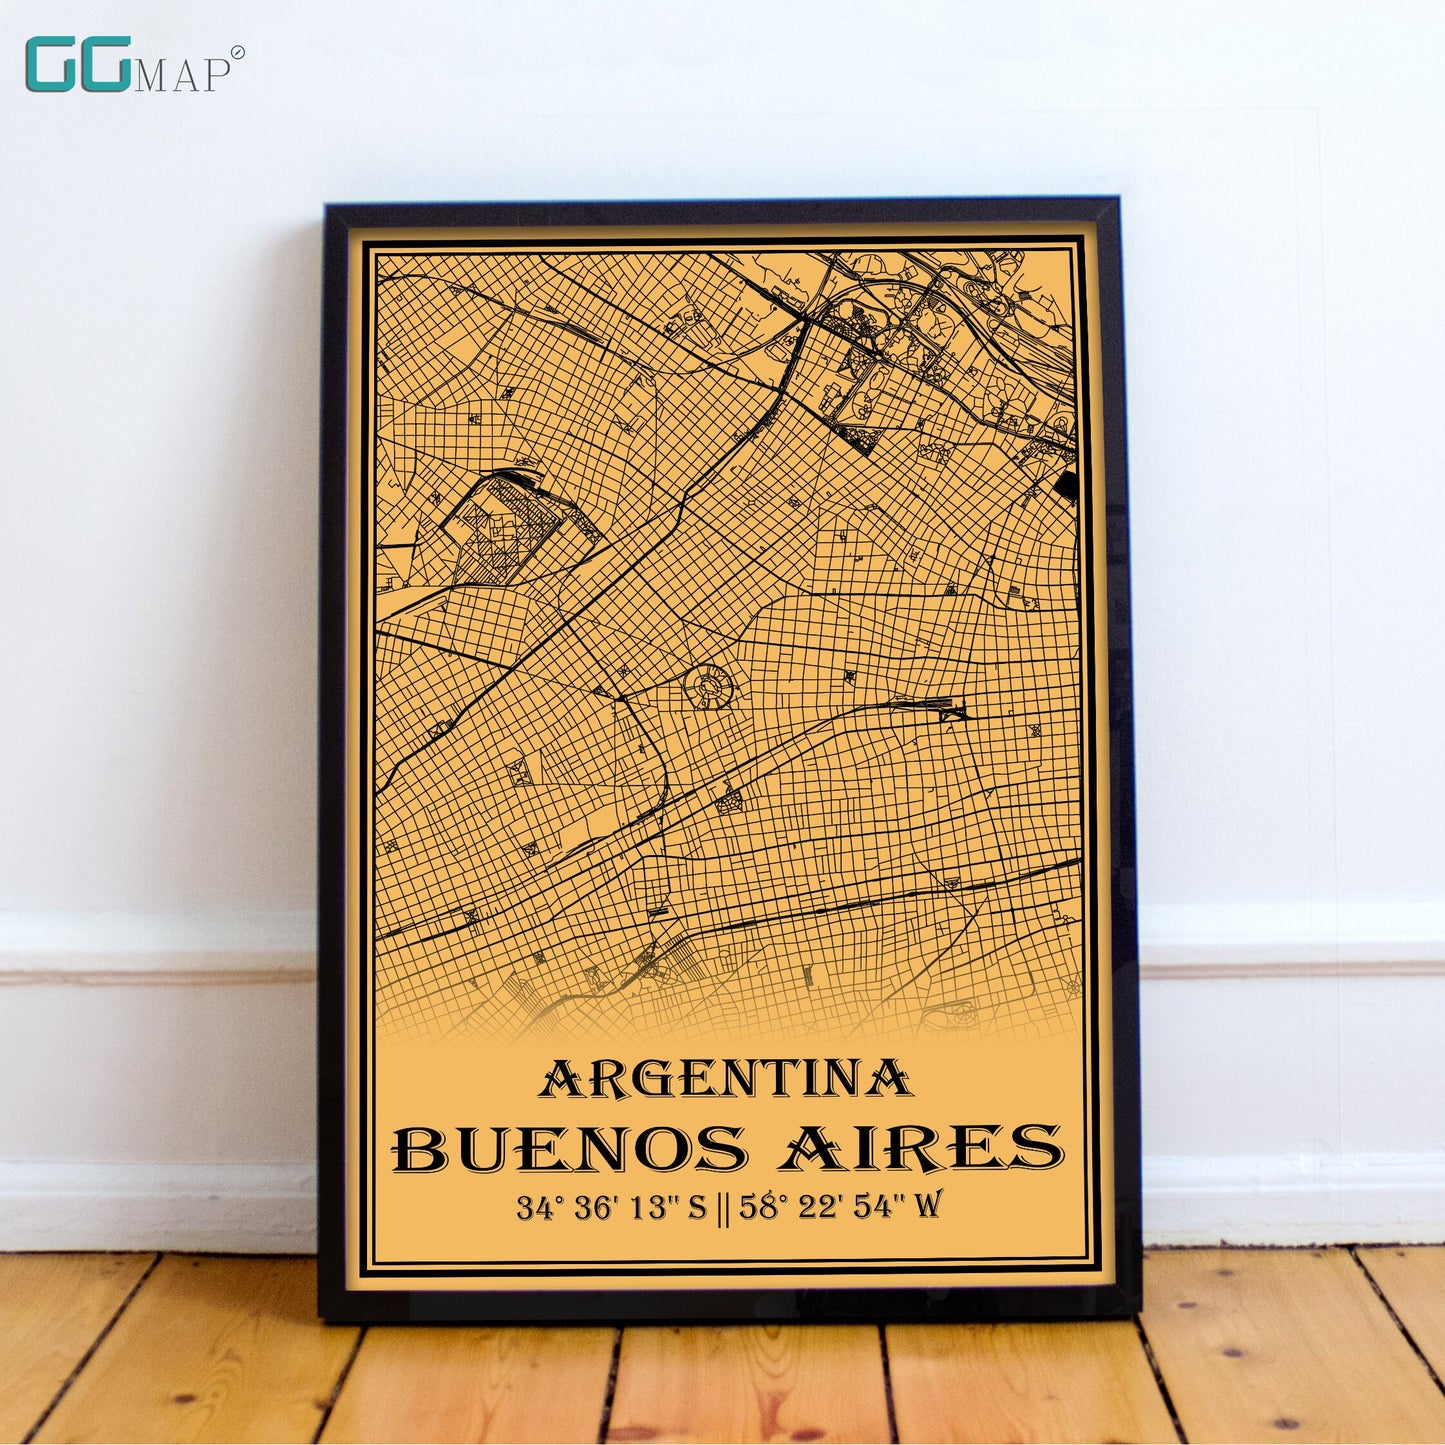 City map of BUENOS AIRES - Home Decor - Office map - Travel map - Print map - Medallion yellow map - Buenos Aires map - Map art - Argentina